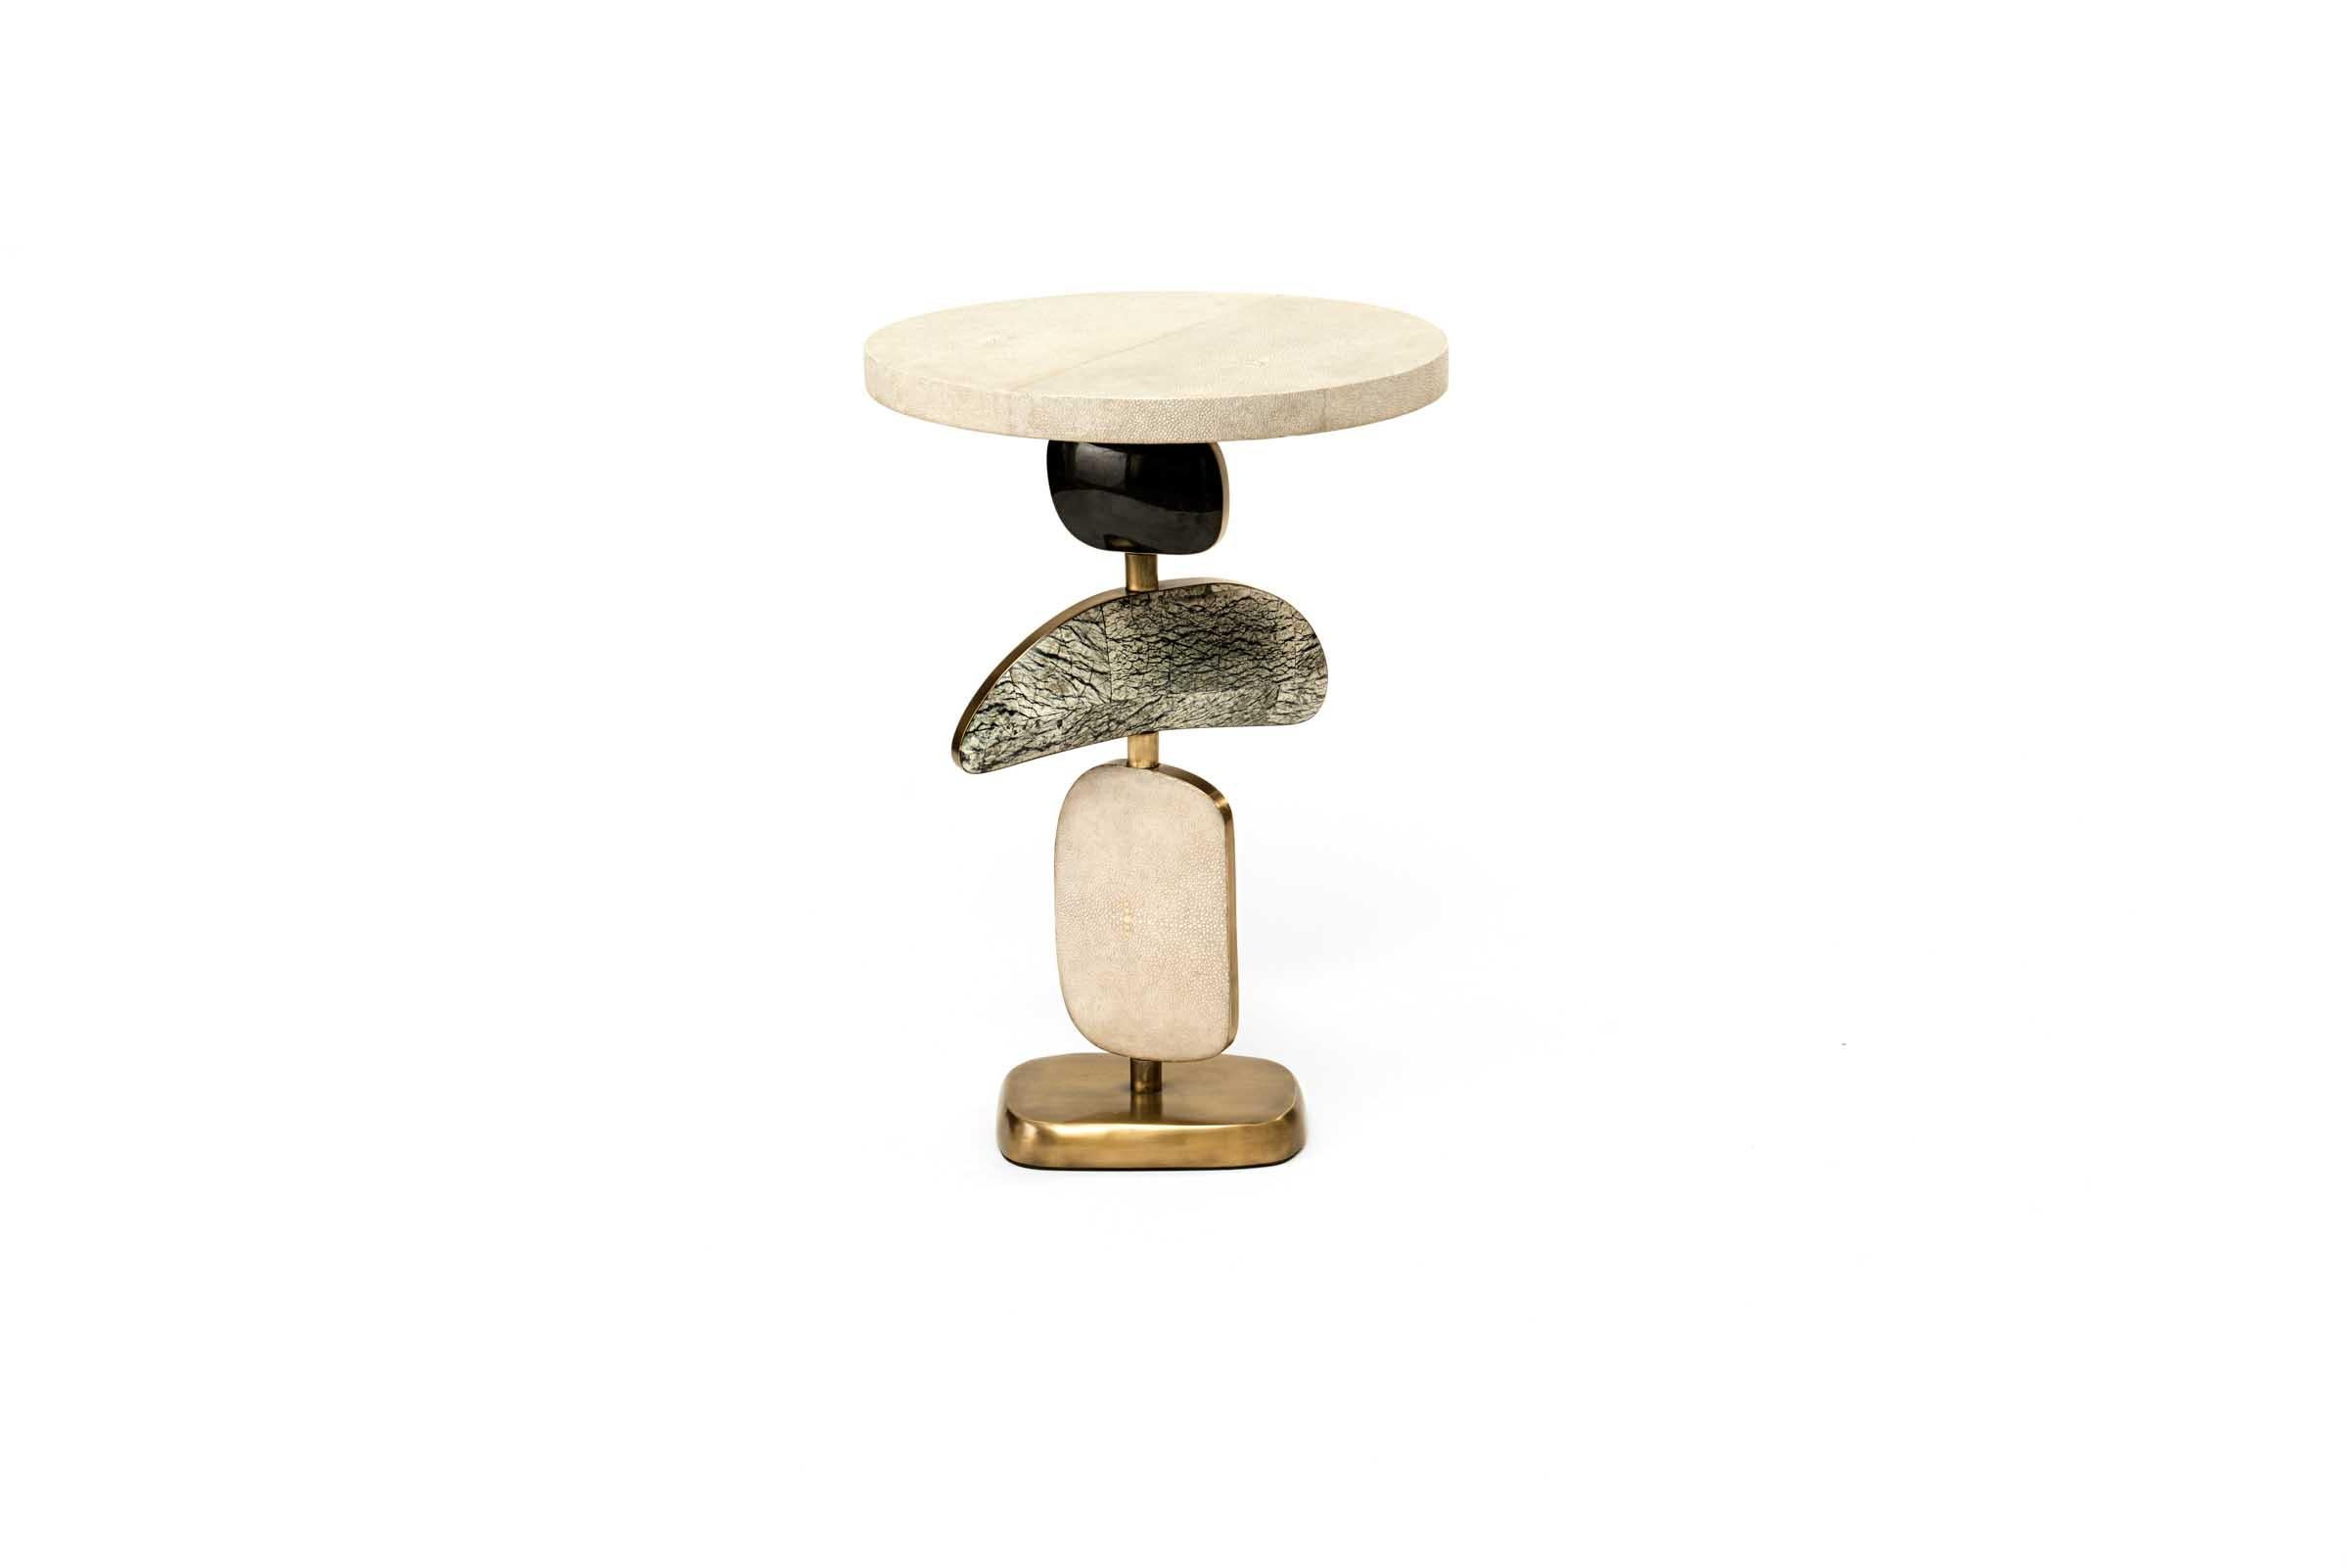 Hand-Crafted Shagreen Side Table with Mobile Sculptural Parts and Brass Accents by Kifu Paris